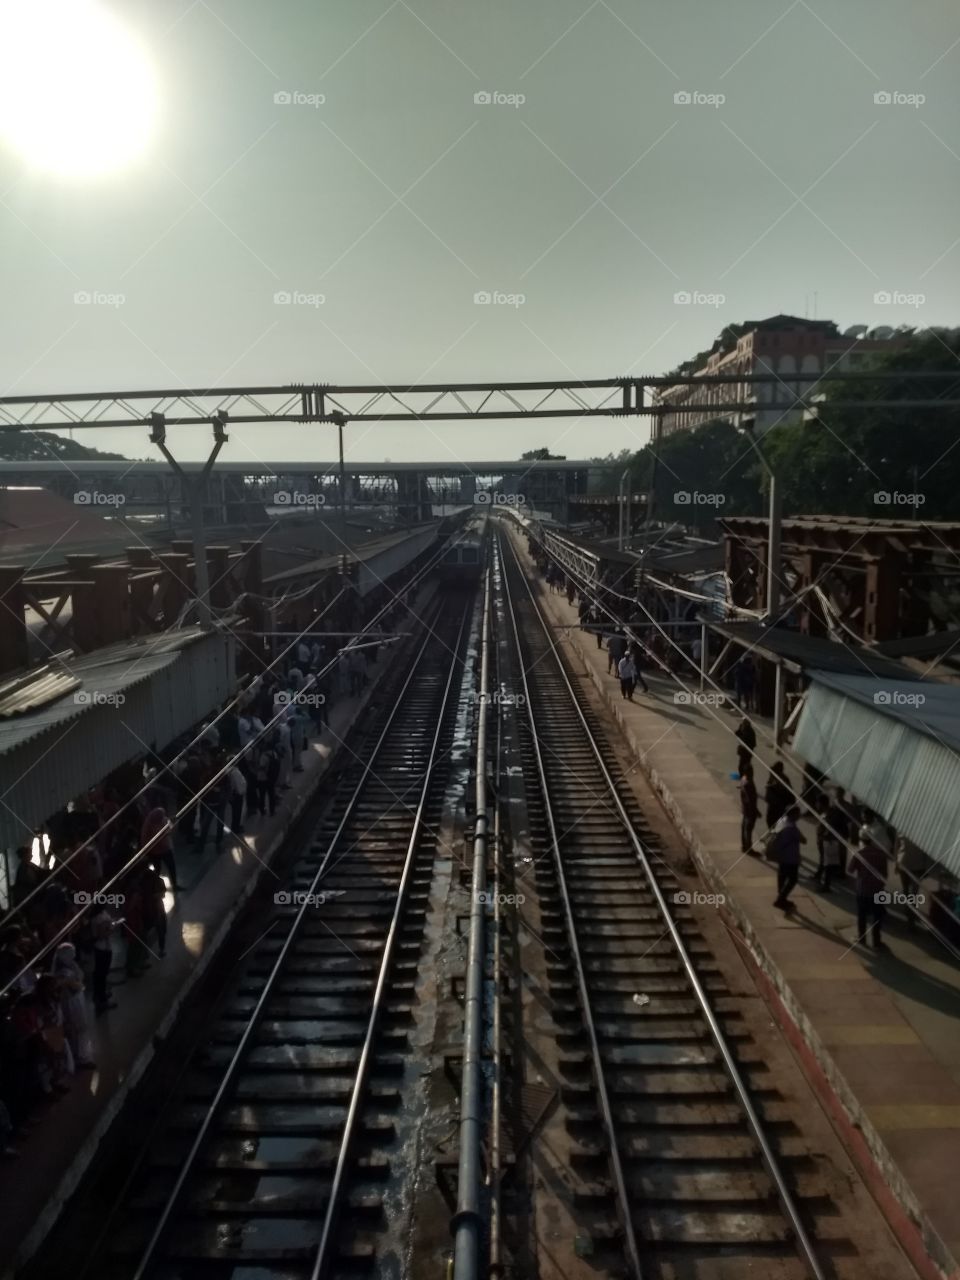 This photo is taken at Pune station by a mobile Moto g5 plus. This is a big crowded place in Pune. The photo was taken from a bridge.